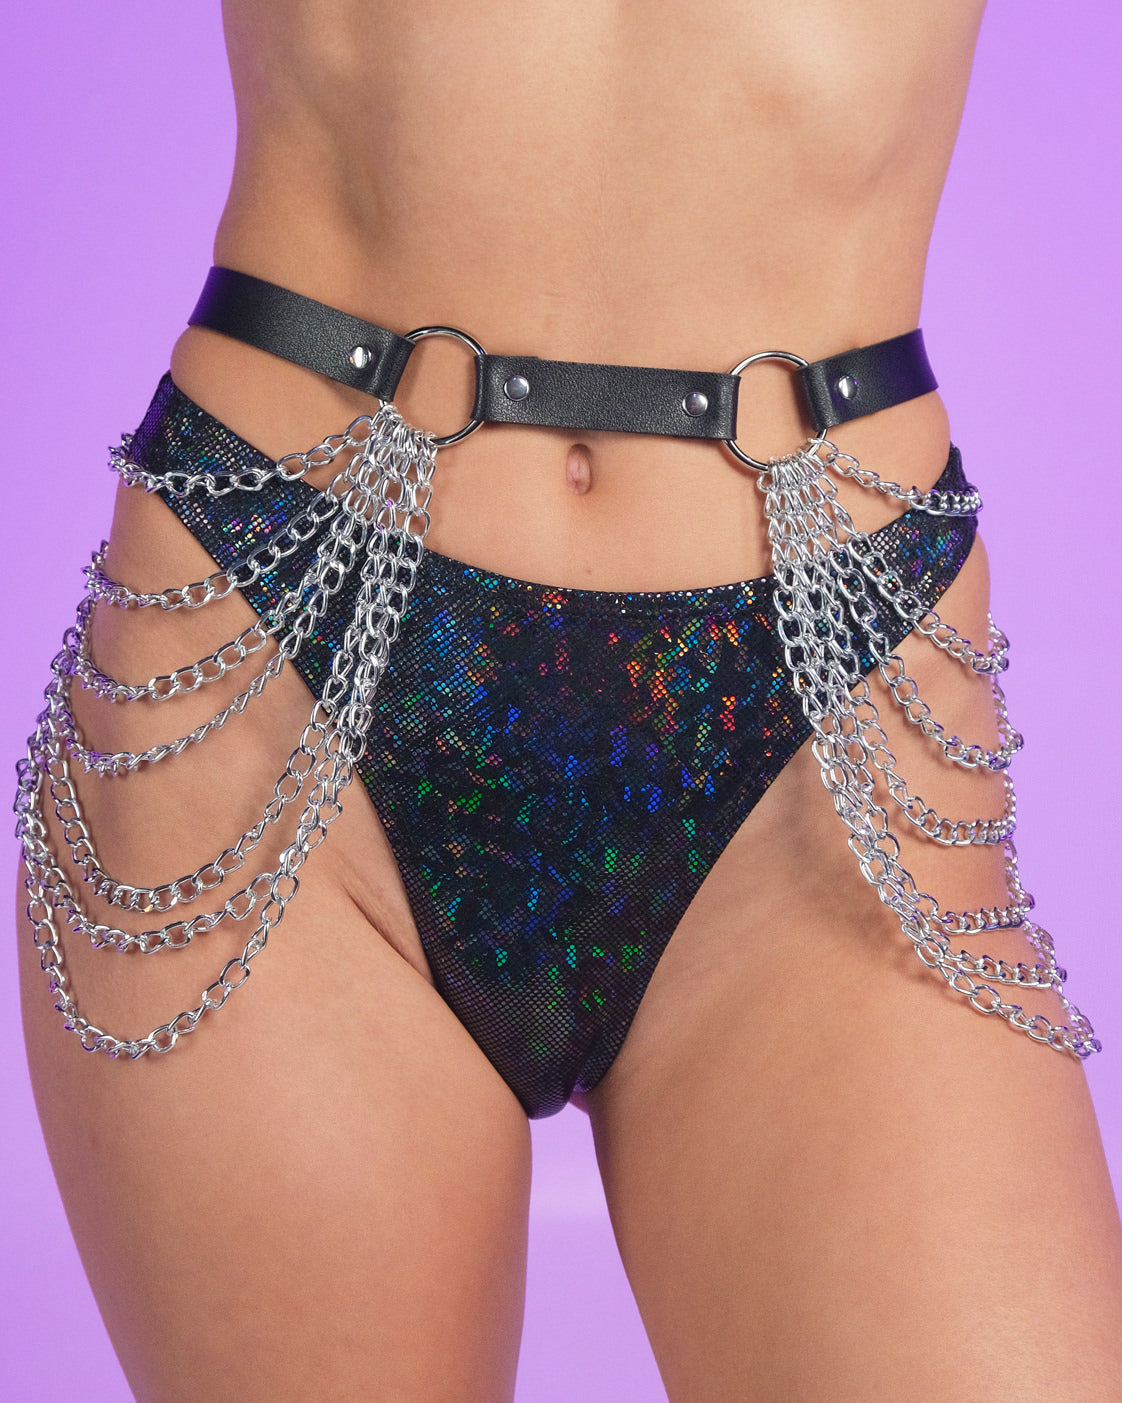 All Chained Up Faux Leather Belt - Rave Wonderland